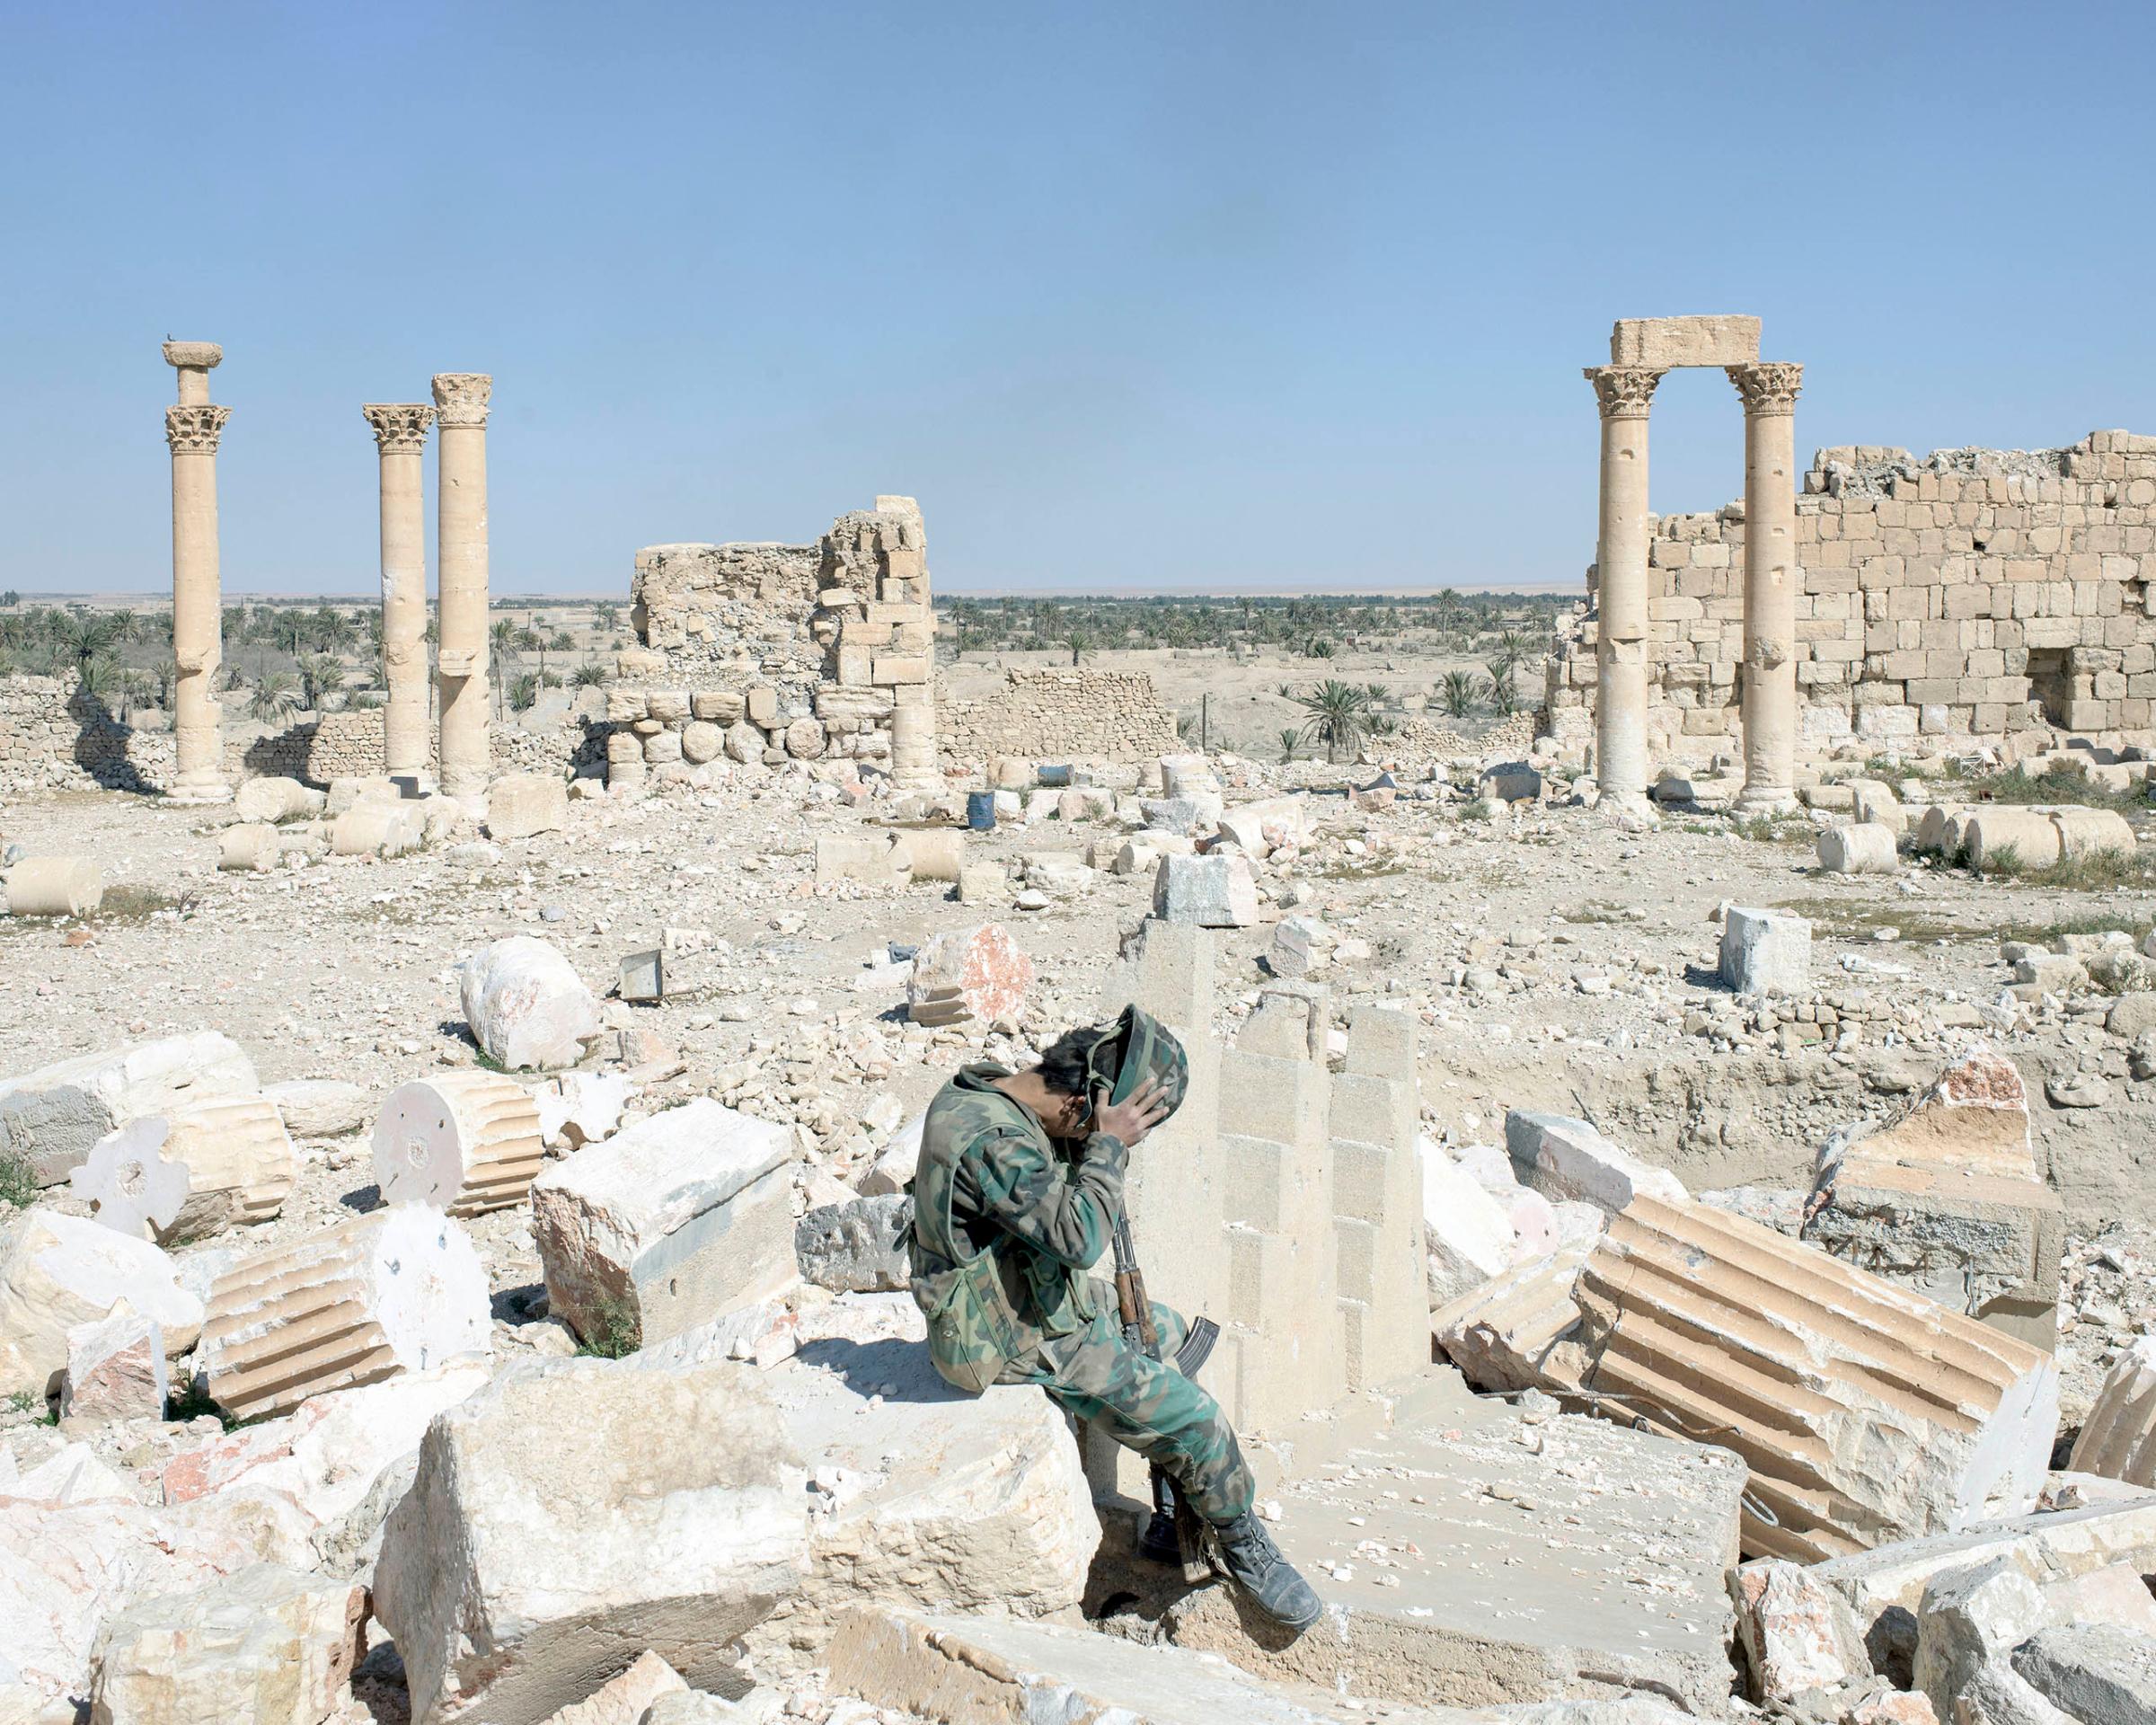 A Syrian army soldier removes his helmet while sitting on rubble of the former Temple of Bel, one of several sites destroyed by ISIS militants, in ancient Palmyra, Syria, April 1, 2016.